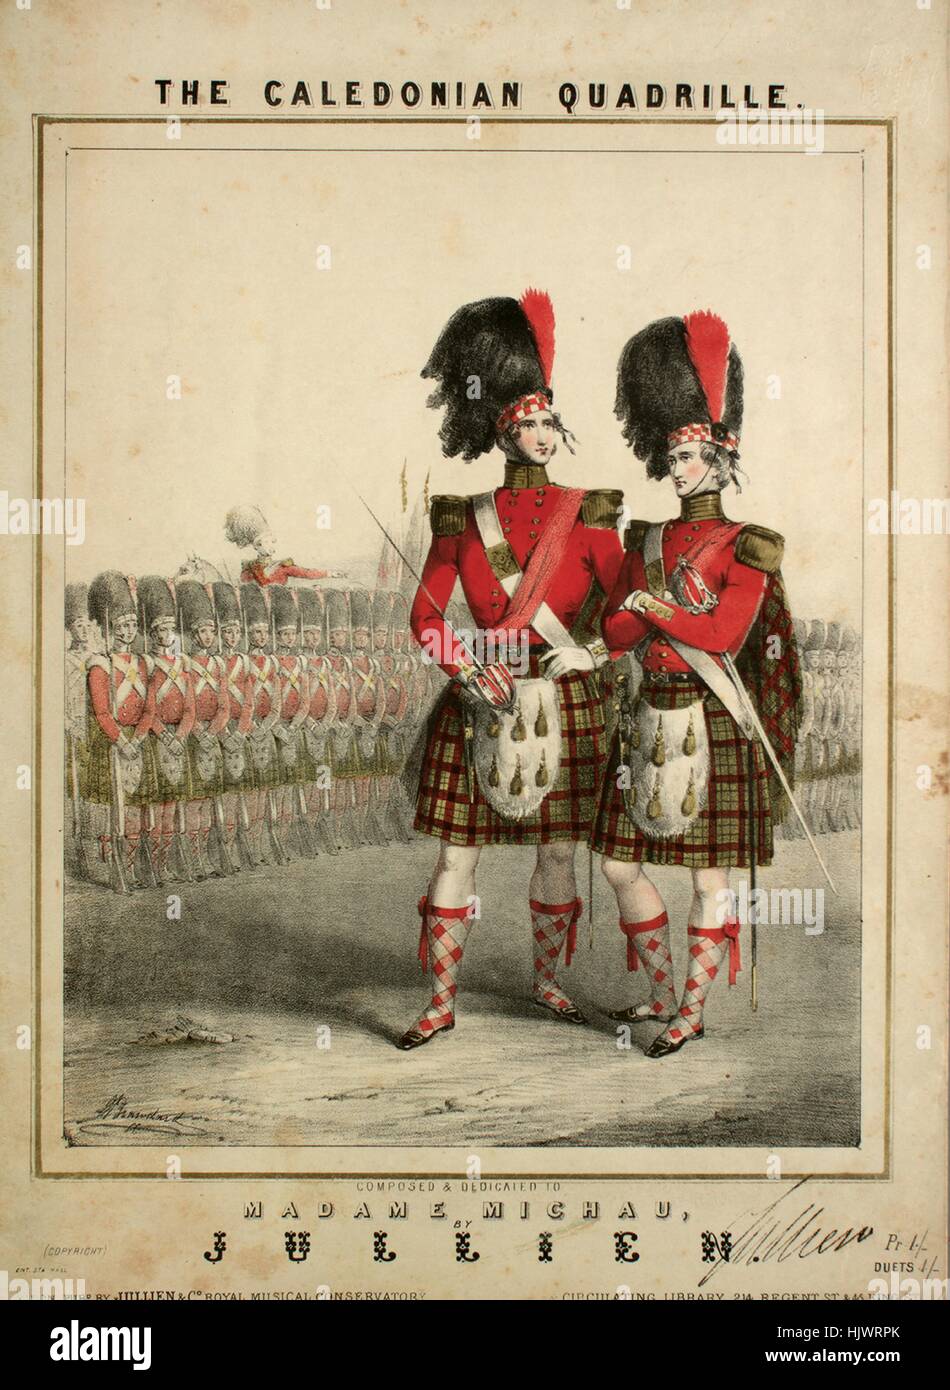 Sheet music cover image of the song 'The Caledonian Quadrille (1) We're a' Noddin'; (2) The Lass O'Gowrle; (3) Kenmure's On and Awa'; (4) Charlie is My Darling; (5) Duncan Gray;  (6) John Anderson My Joe; (7) Scots Wha Hae', with original authorship notes reading 'Composed by Jullien', 1900. The publisher is listed as 'Jullien and Co., Royal Musical Conservatory, Circulating Library, 214 Regent St., and 45 King St.', the form of composition is 'five movements in da capo form', the instrumentation is 'piano', the first line reads 'None', and the illustration artist is listed as 'signature of de Stock Photo